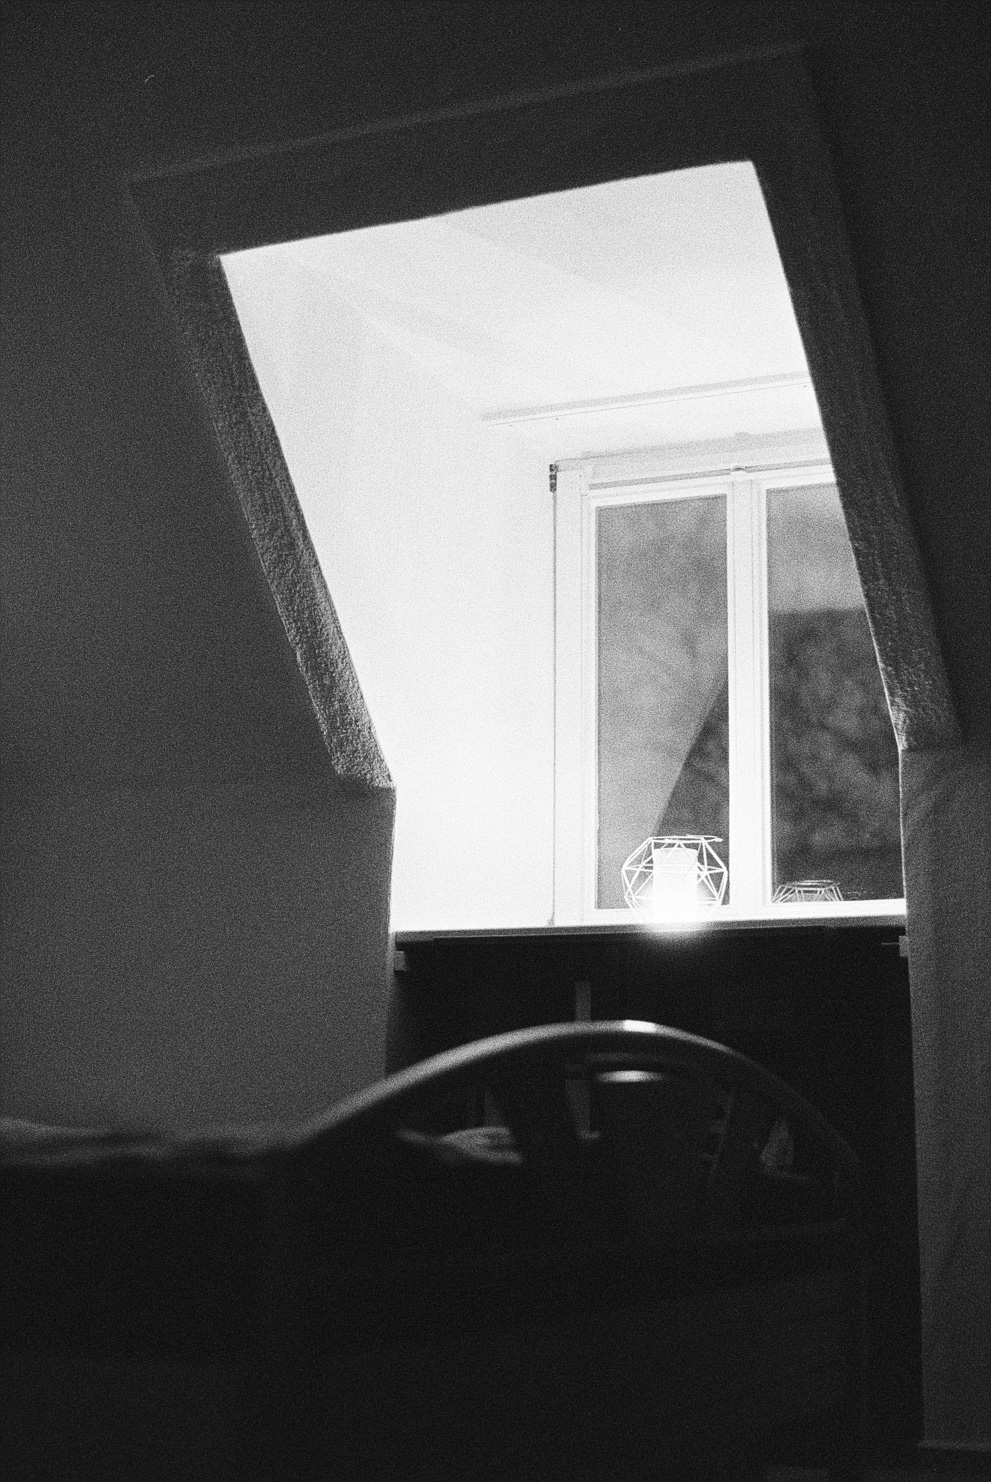 A single candle on a window sill. Shot on Ilford Delta 3200